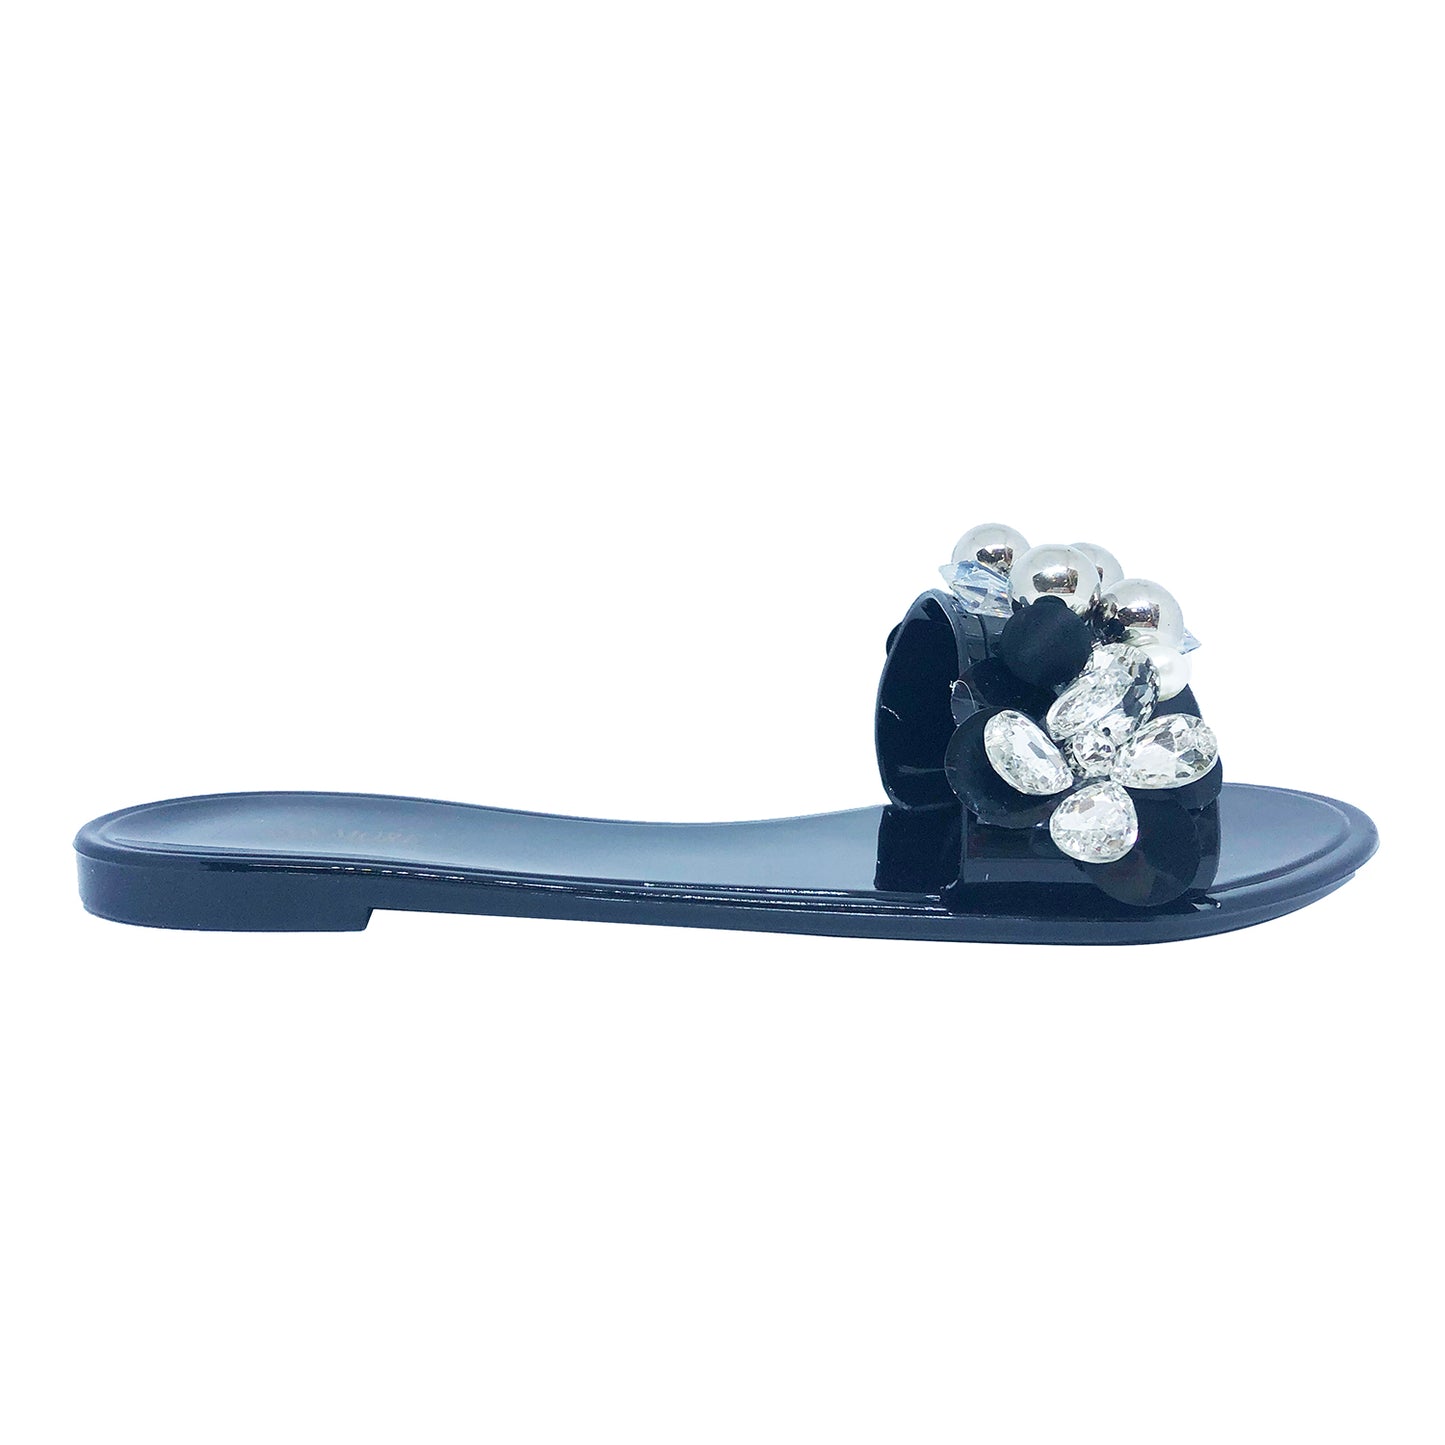 Ann More Biscayne Jelly Sandals